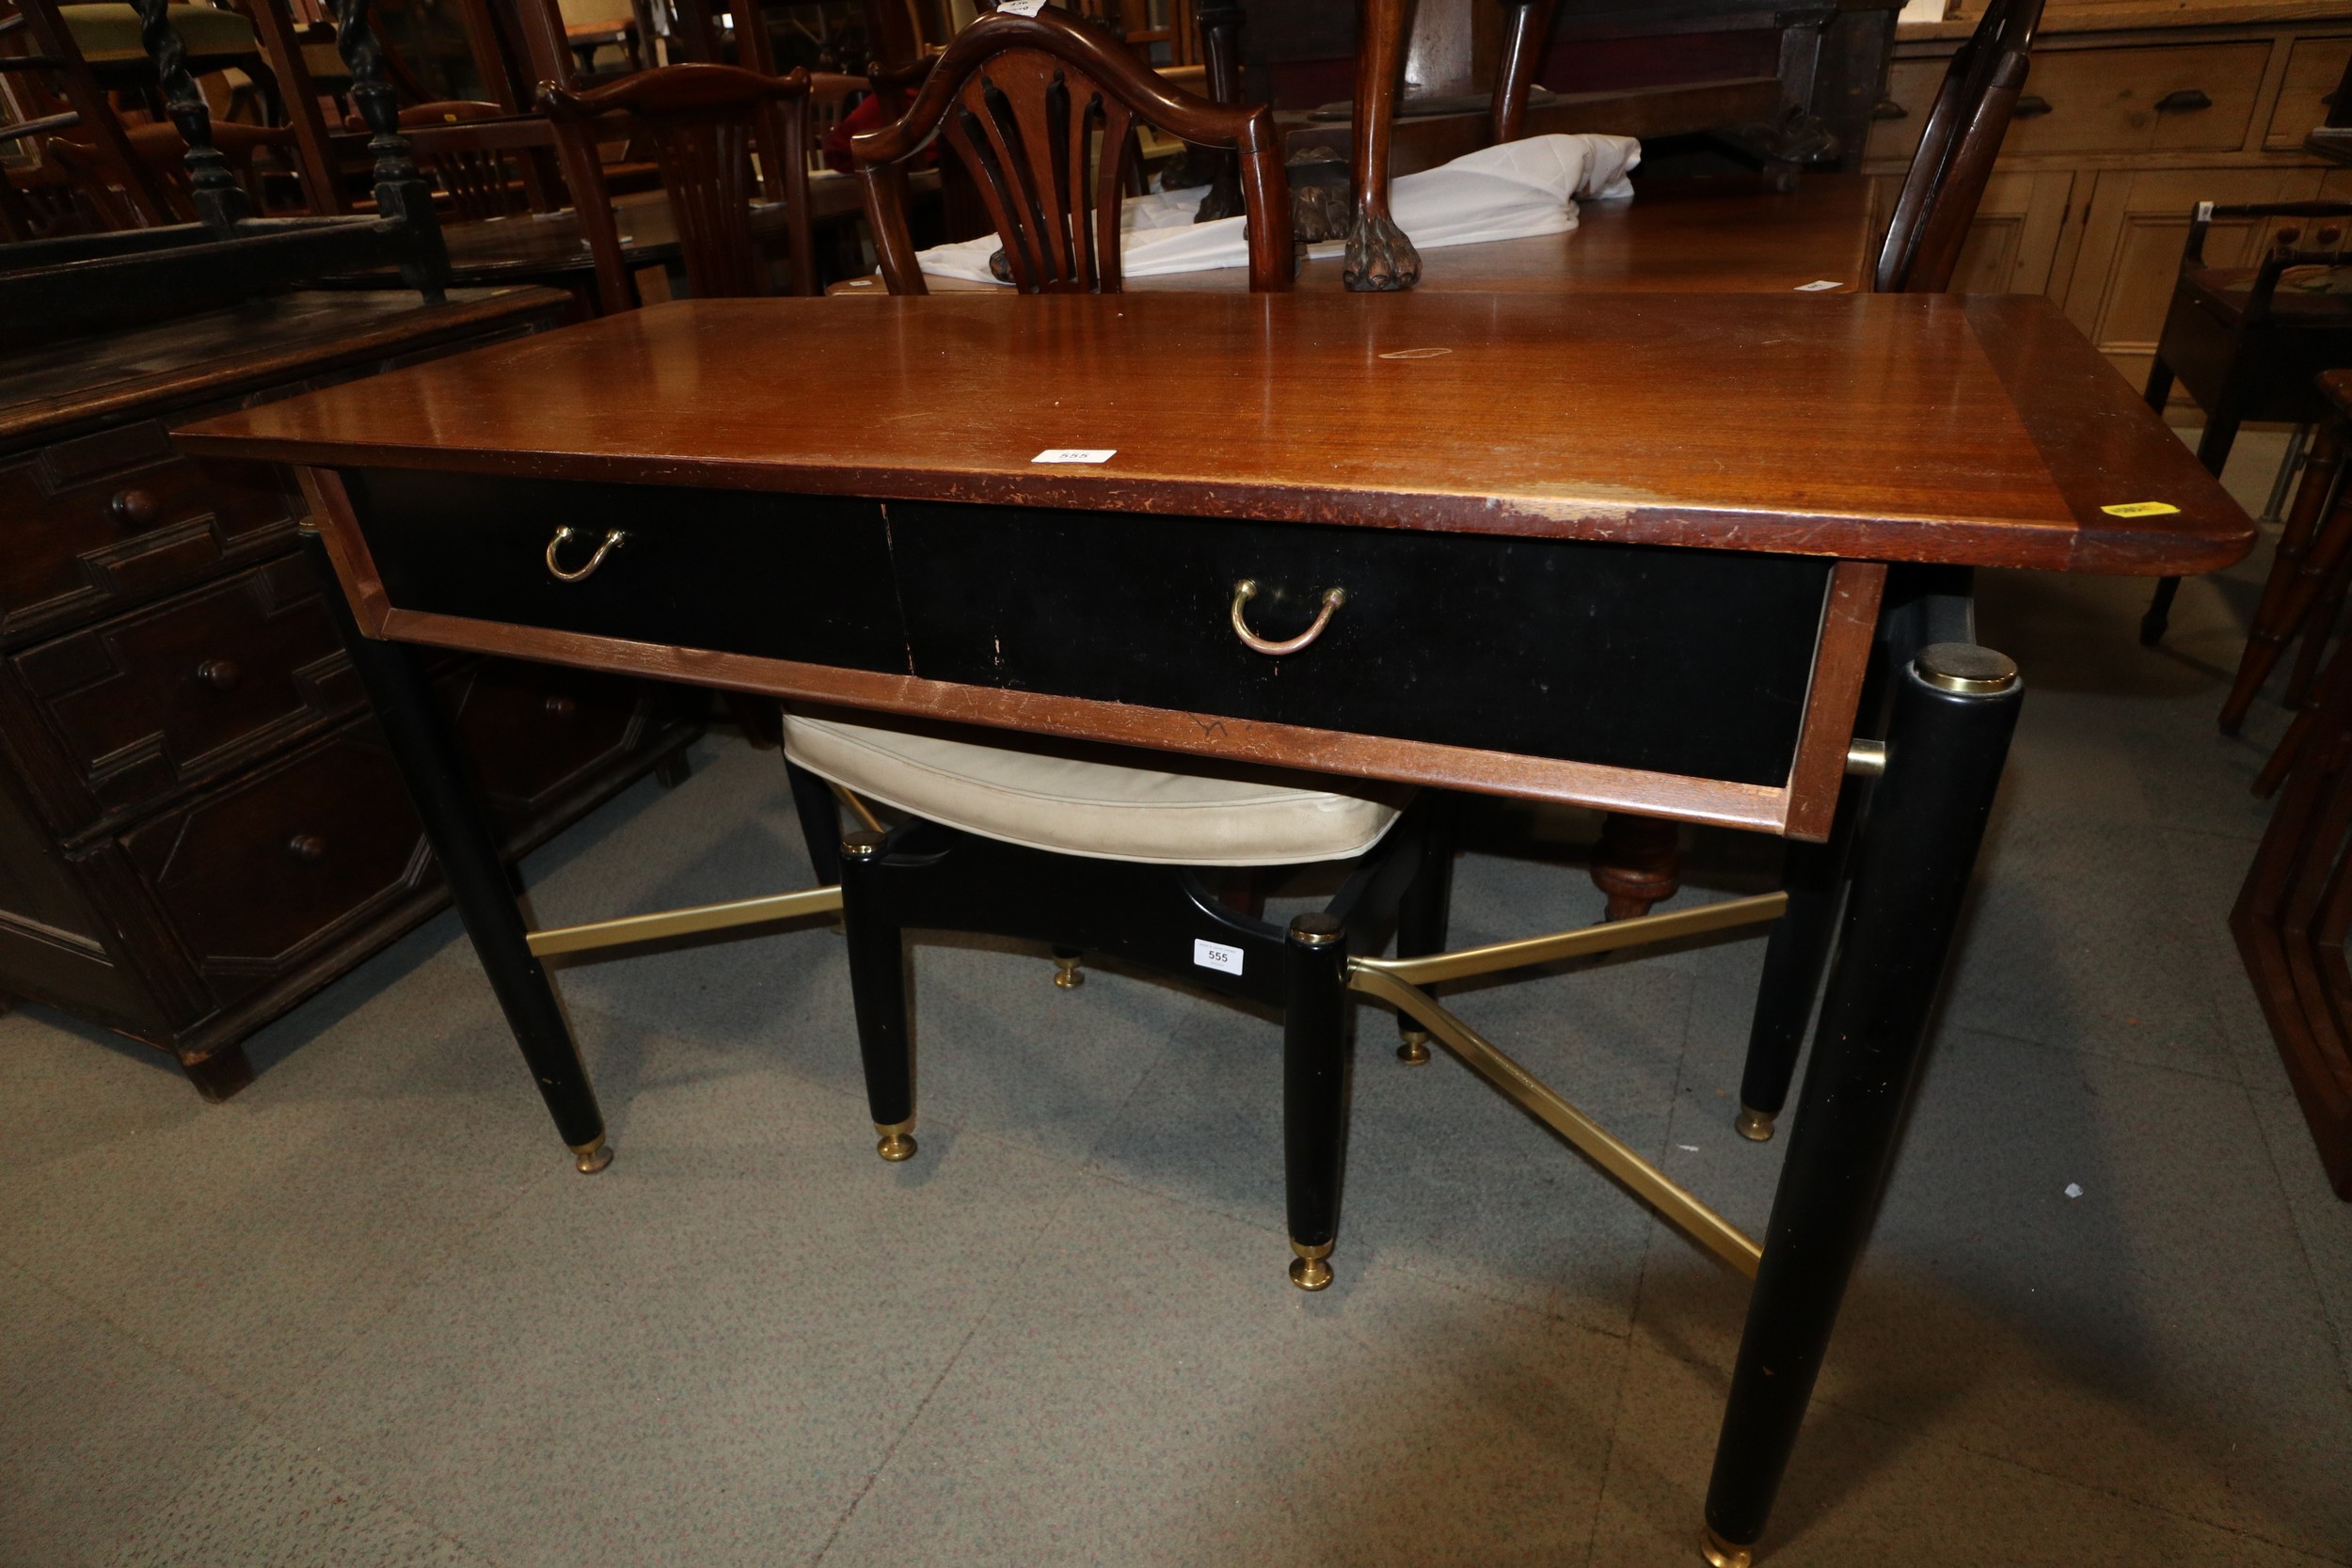 A G Plan "Librenza" teak, ebonised and brass mounted dressing table/side table, fitted two